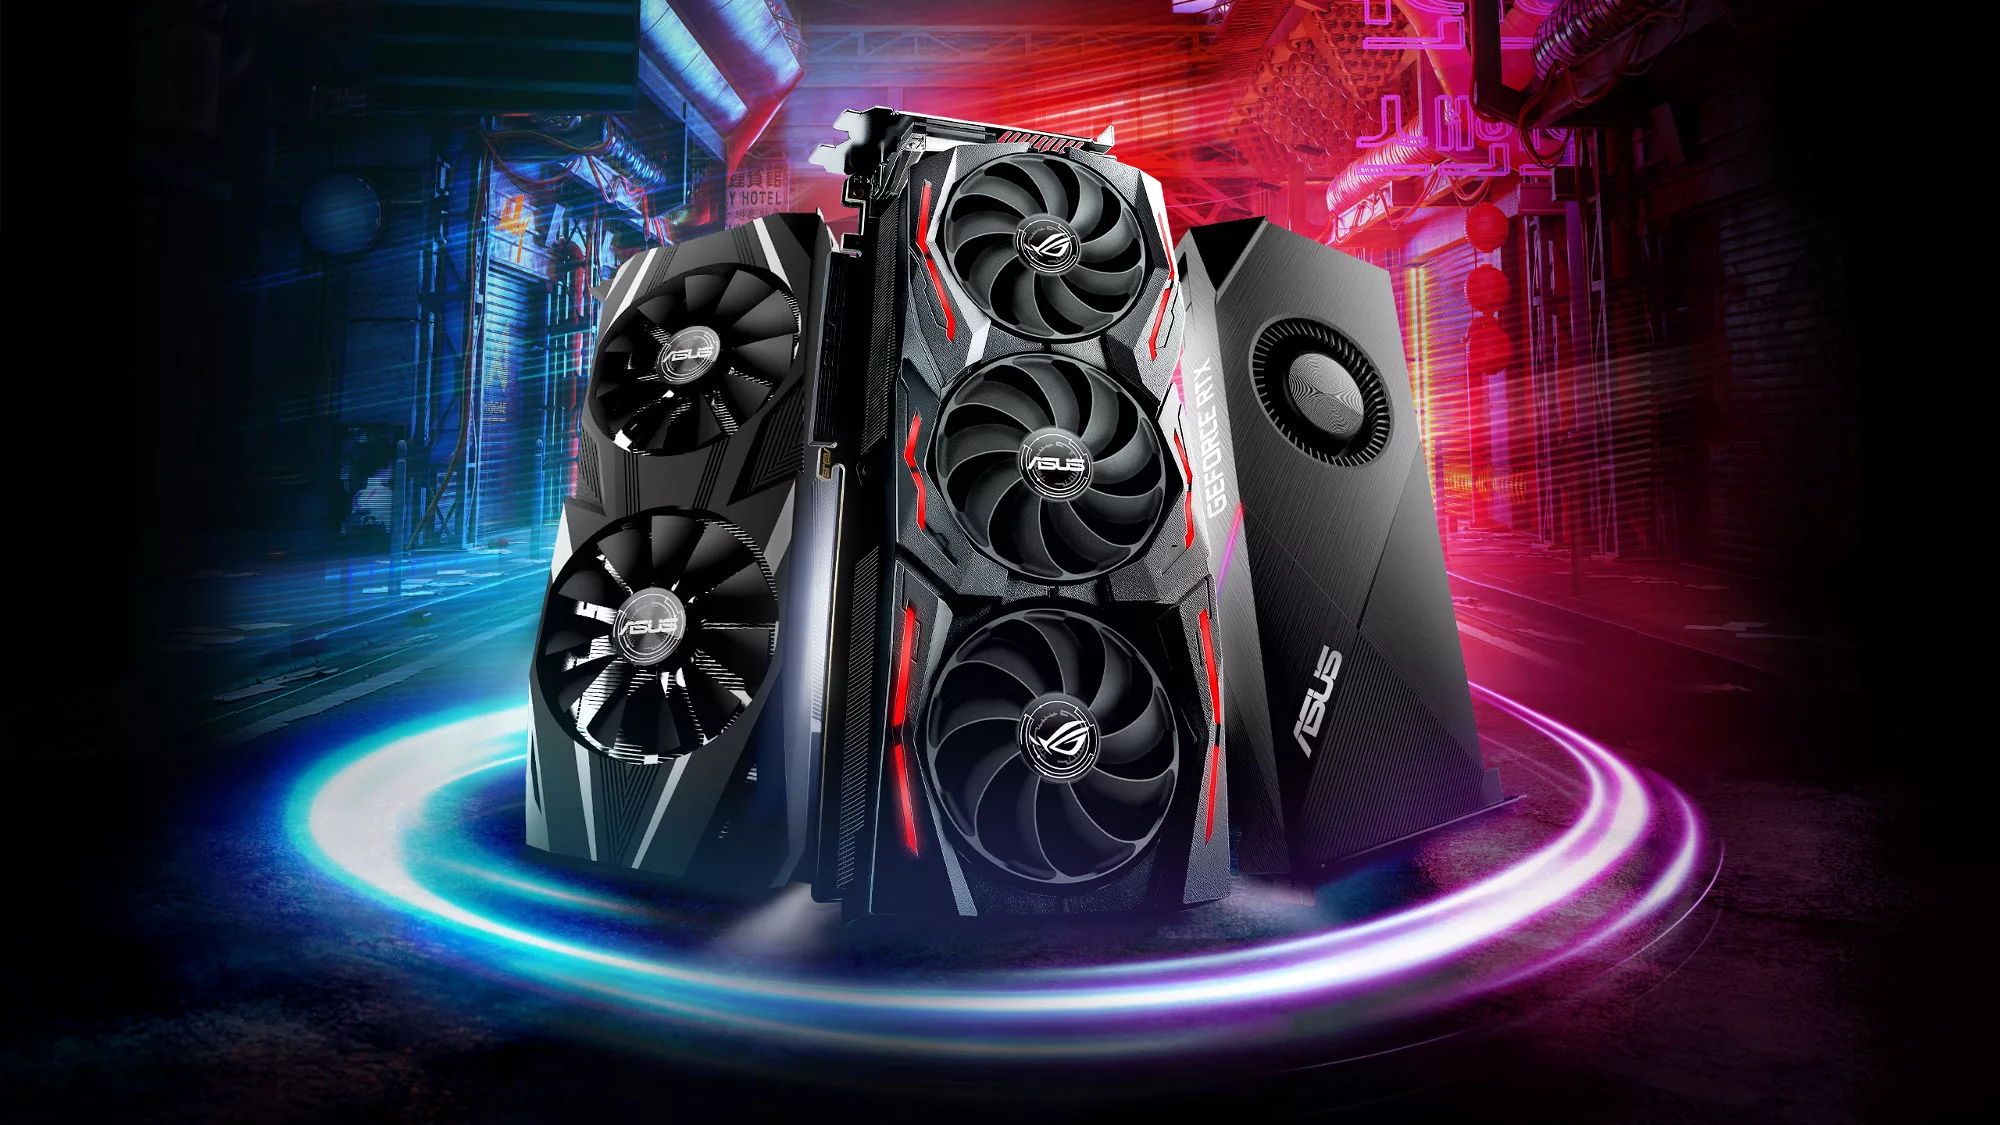 Here come the ROG and ASUS GeForce RTX 2070 graphics cards | ROG - Republic  of Gamers Global